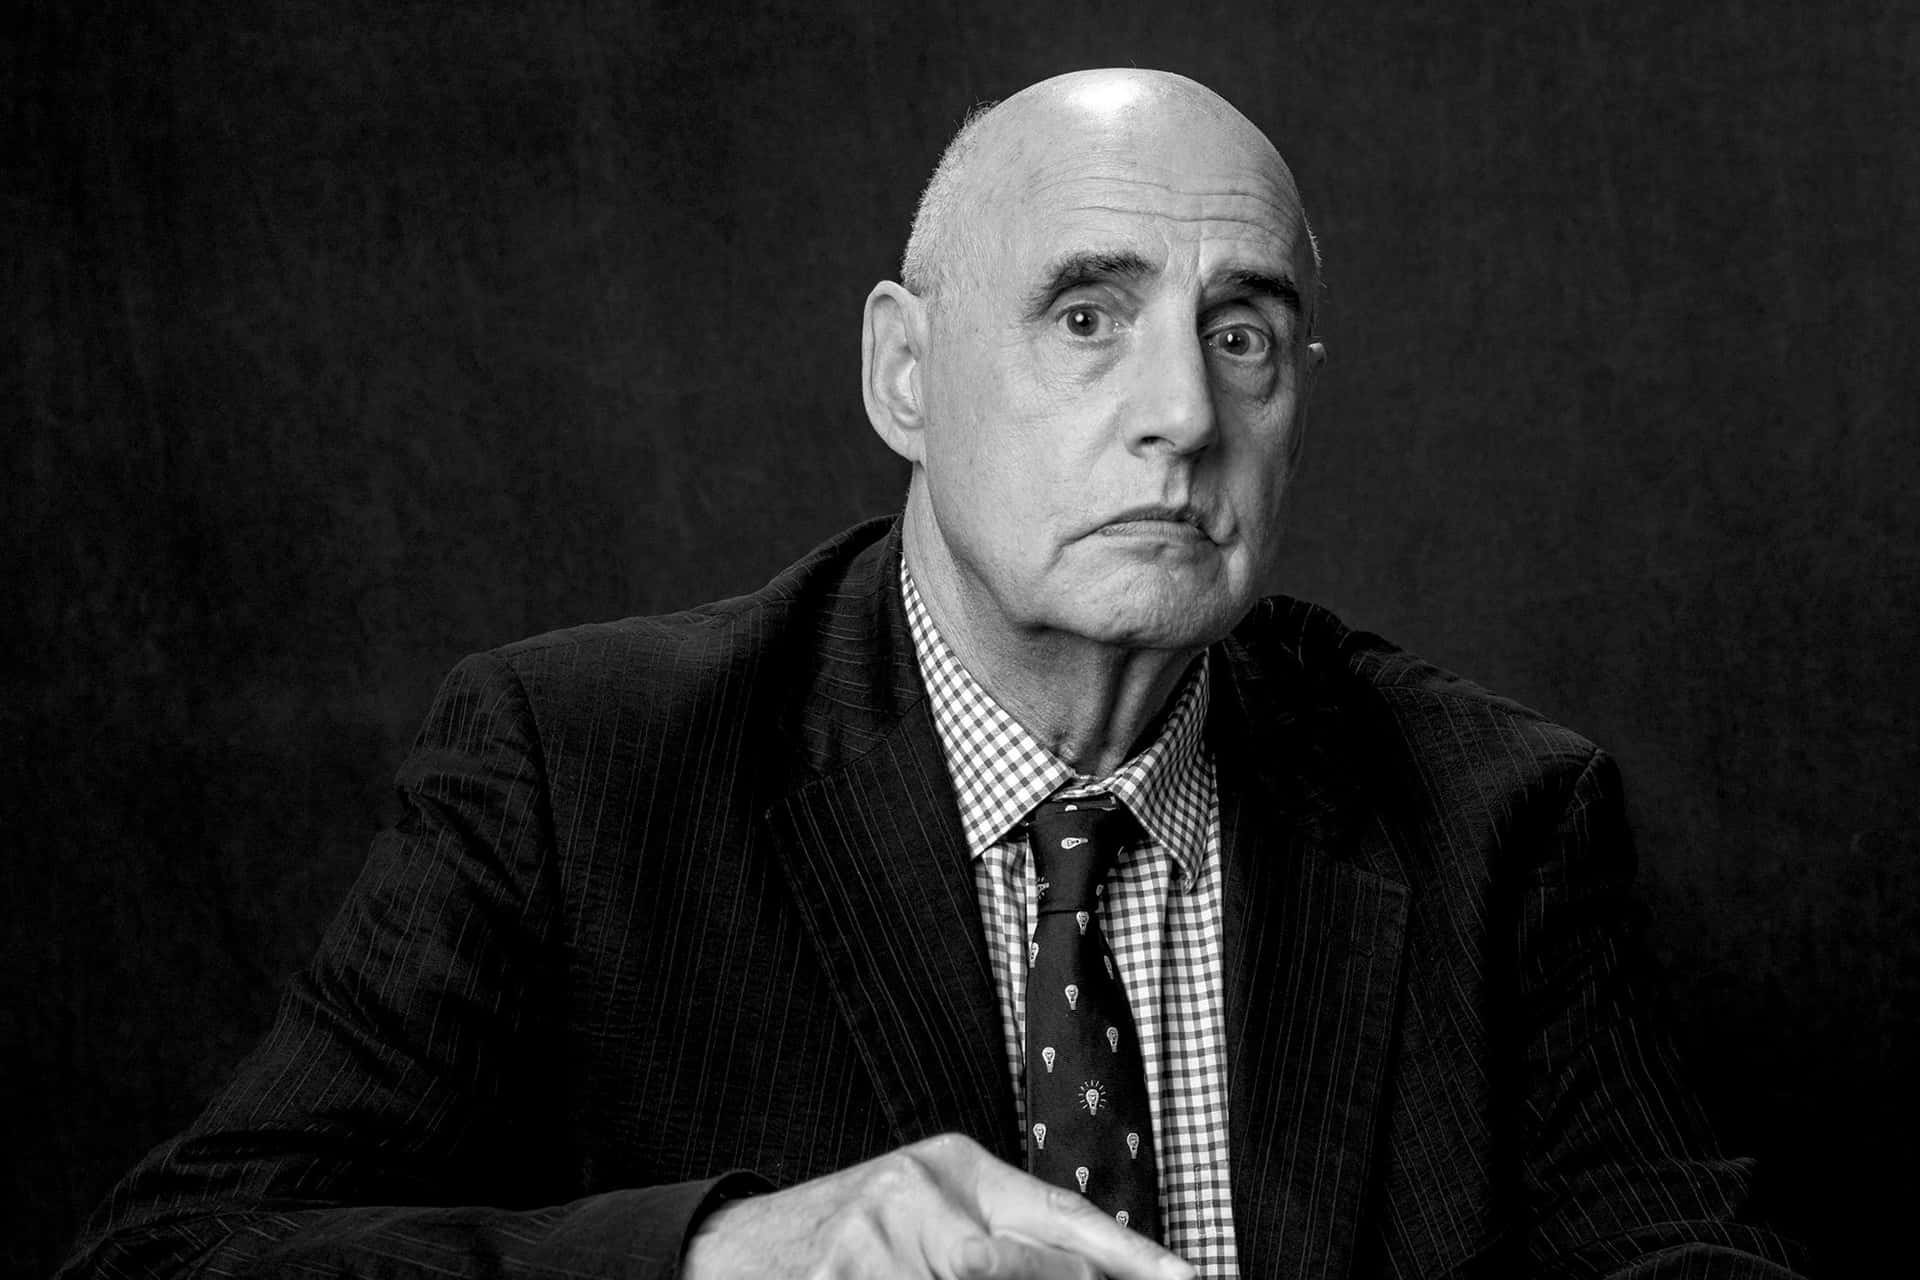 Jeffreytambor Is An Actor Known For His Roles In Tv Shows And Movies. He Gained Recognition For His Performances In Shows Like 